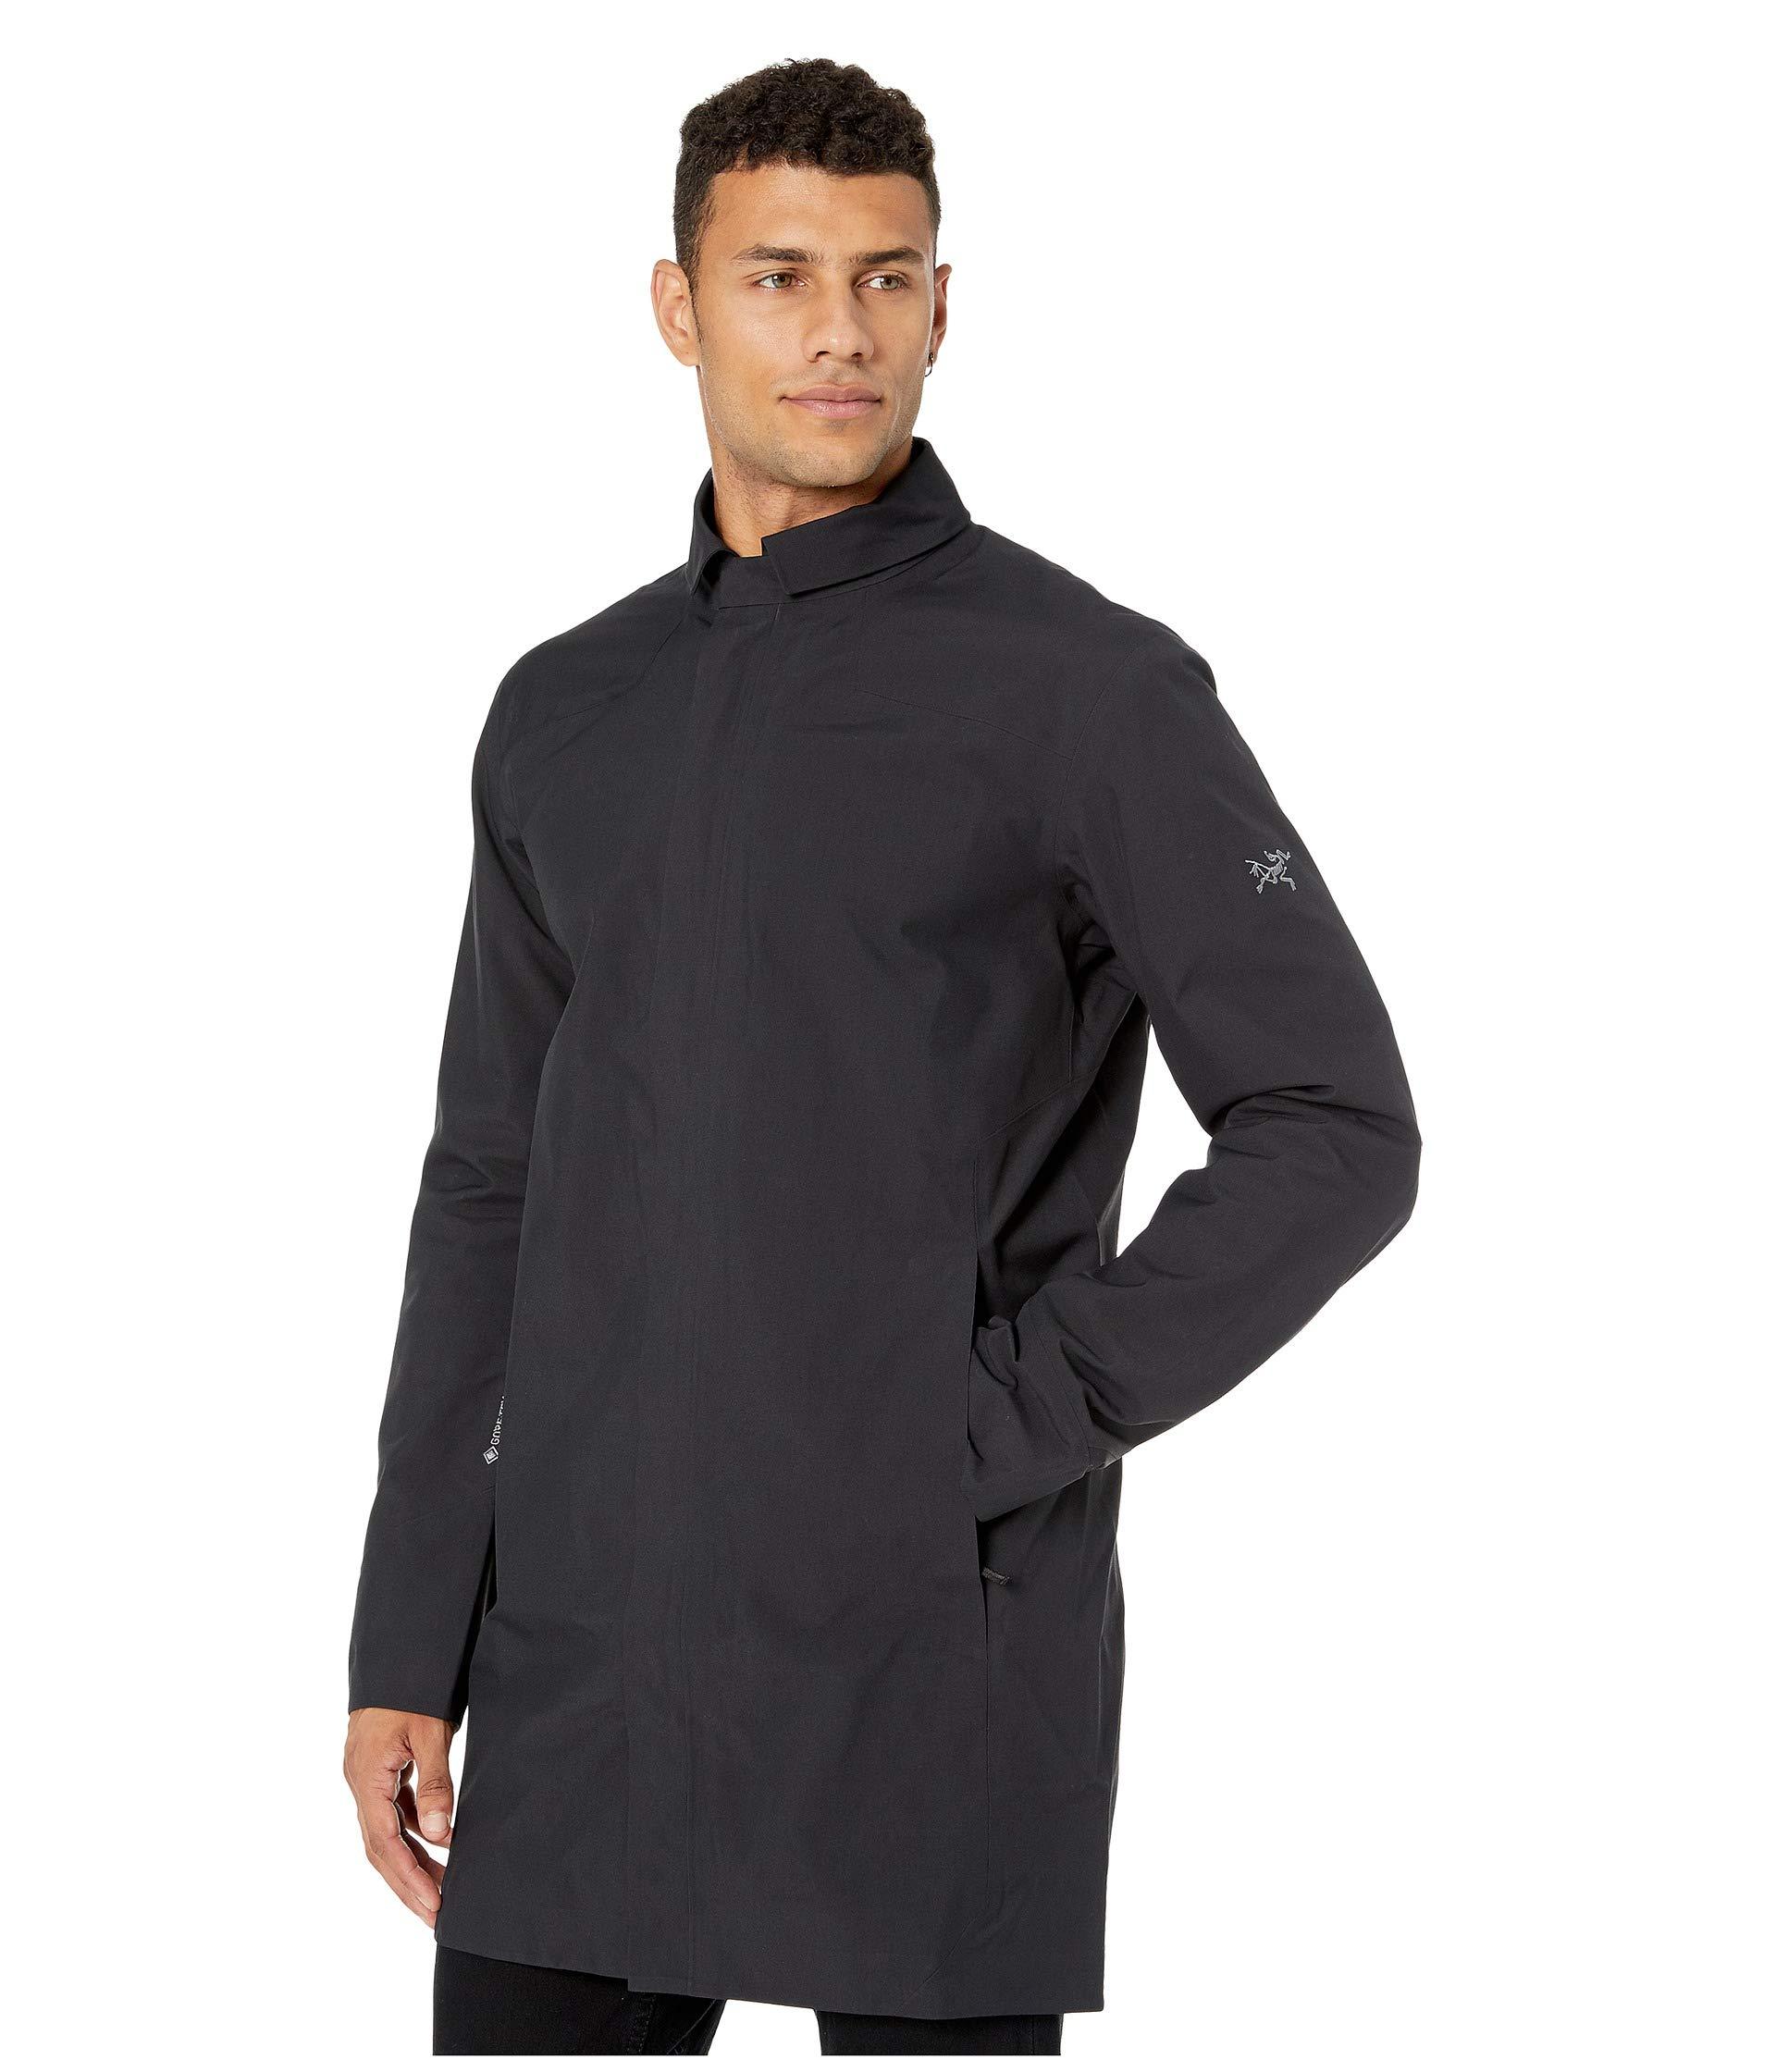 Arc'teryx Synthetic Keppel Trench Coat in Black for Men - Lyst